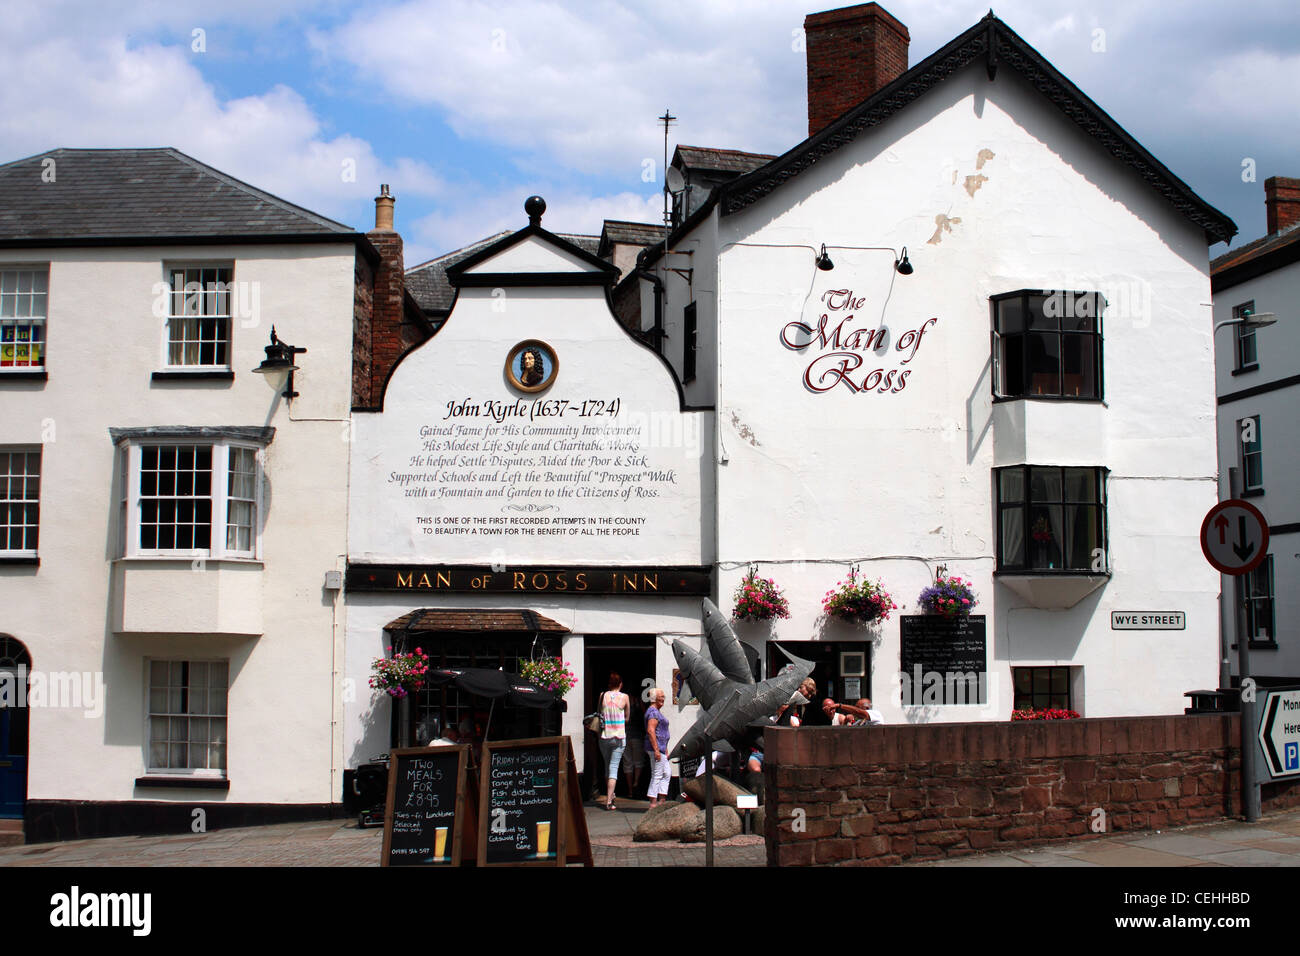 The Man of Ross Public House named after: John Kyrle (22 May 1637 – 7 November 1724), known as 'the Man of Ross', was an English philanthropist, born in the parish of Dymock, Gloucestershire but best remembered for his time in Ross-on-Wye in Herefordshire. Stock Photo